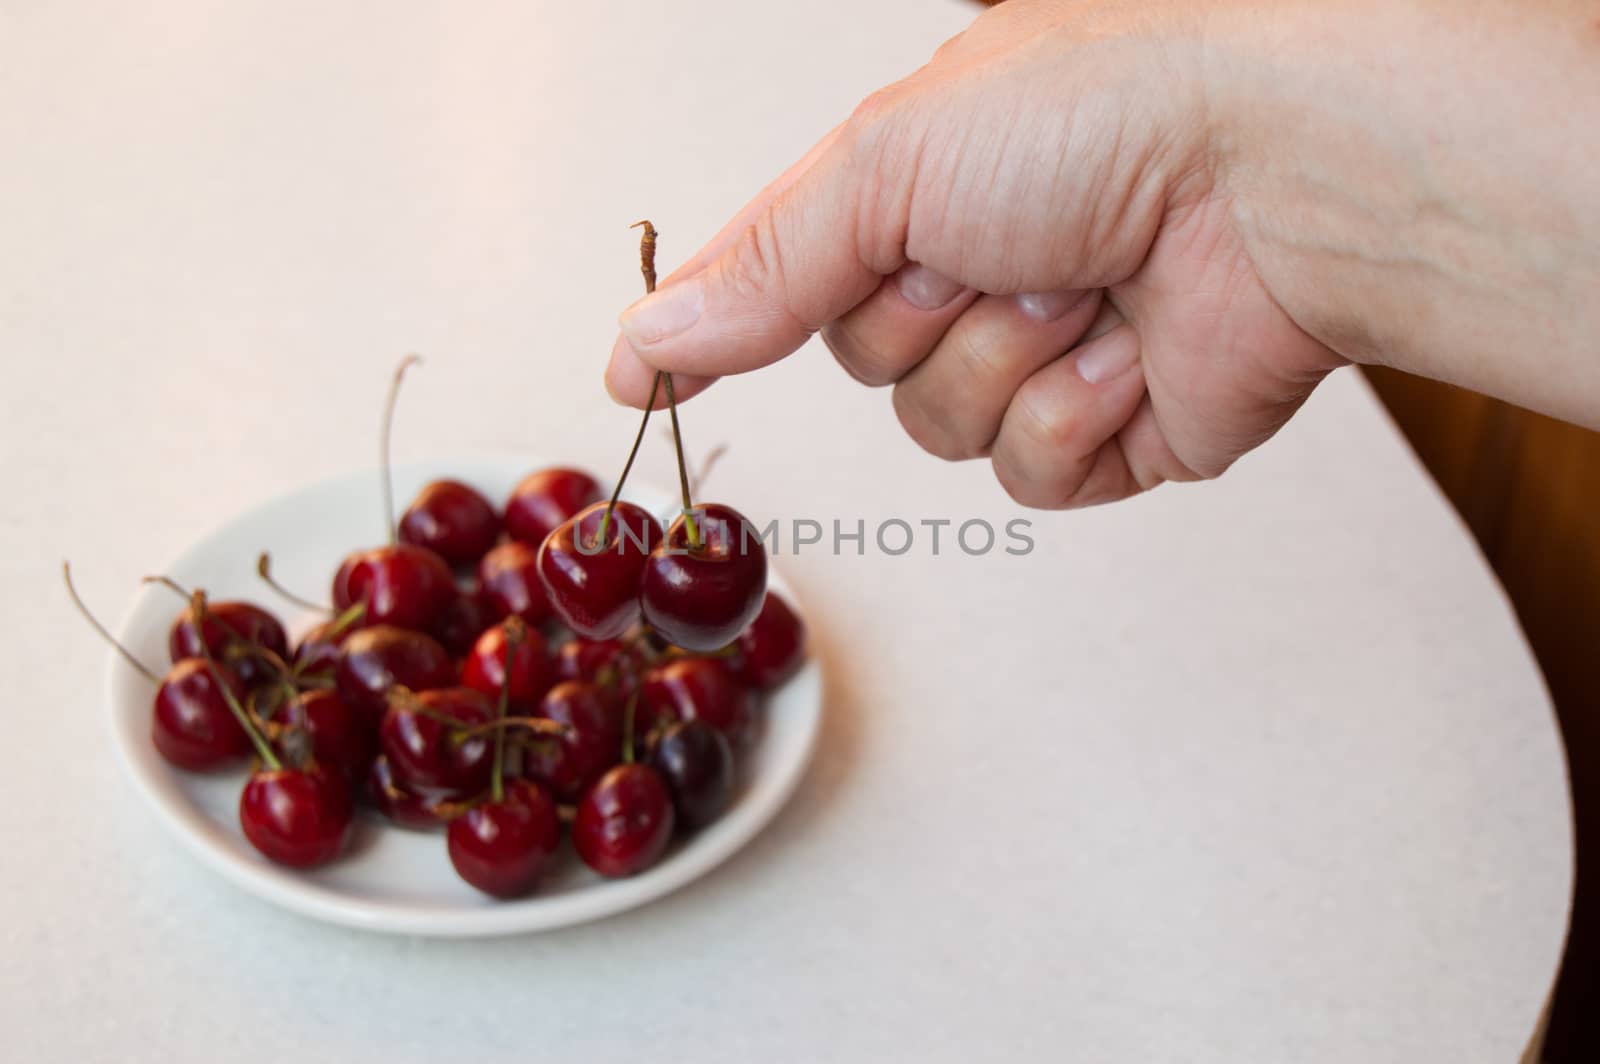 Ripe cherry in the hand and on a white plate, selective focus on hand.